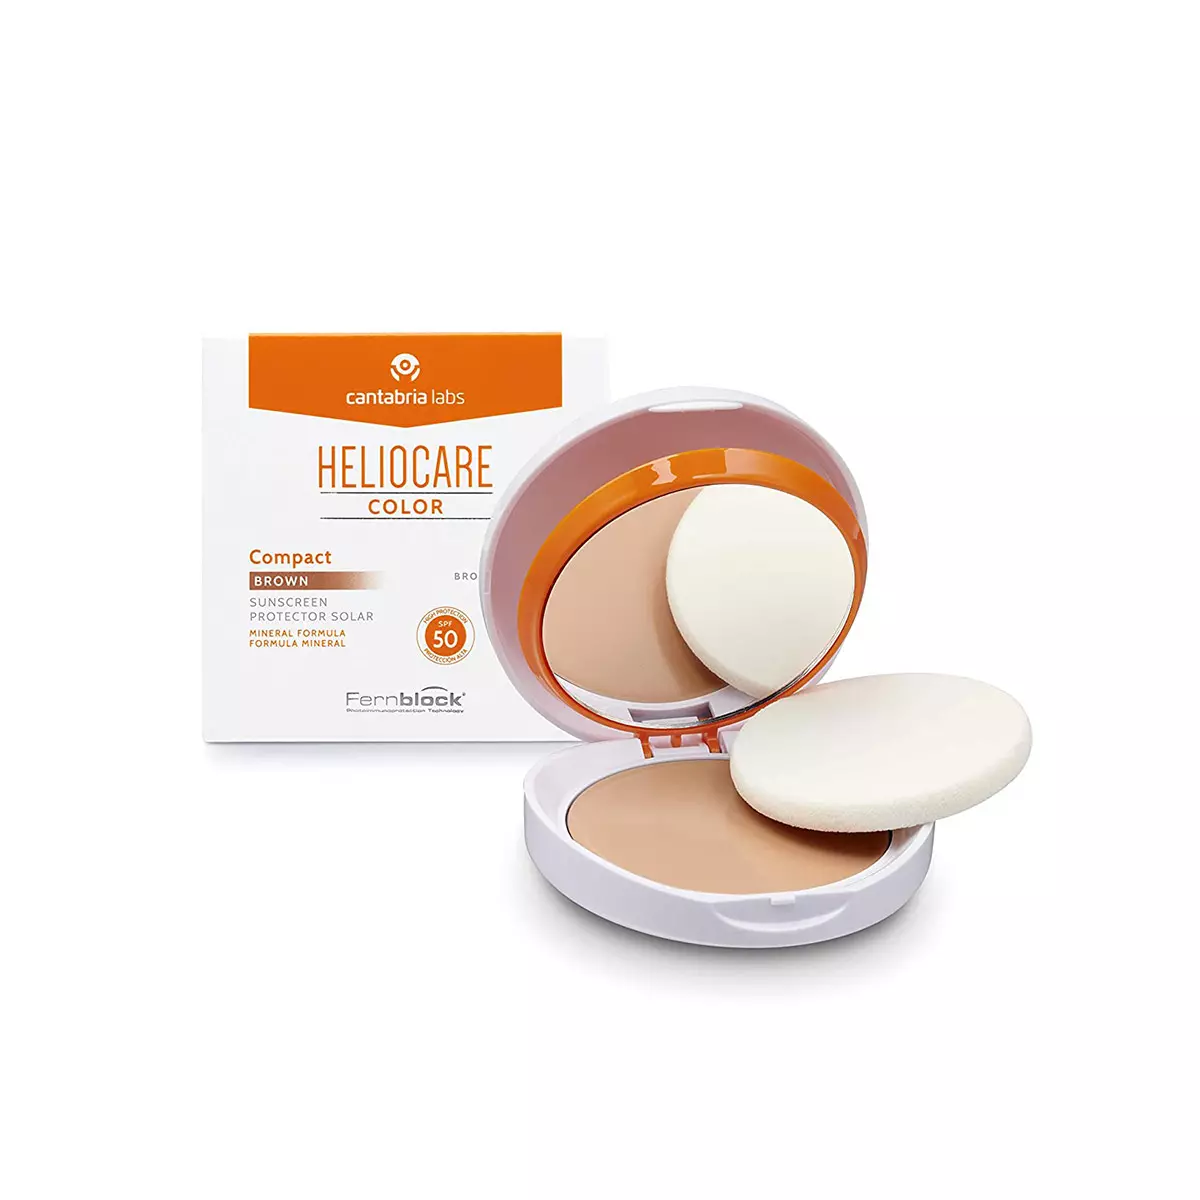 Heliocare compact spf 50 brown